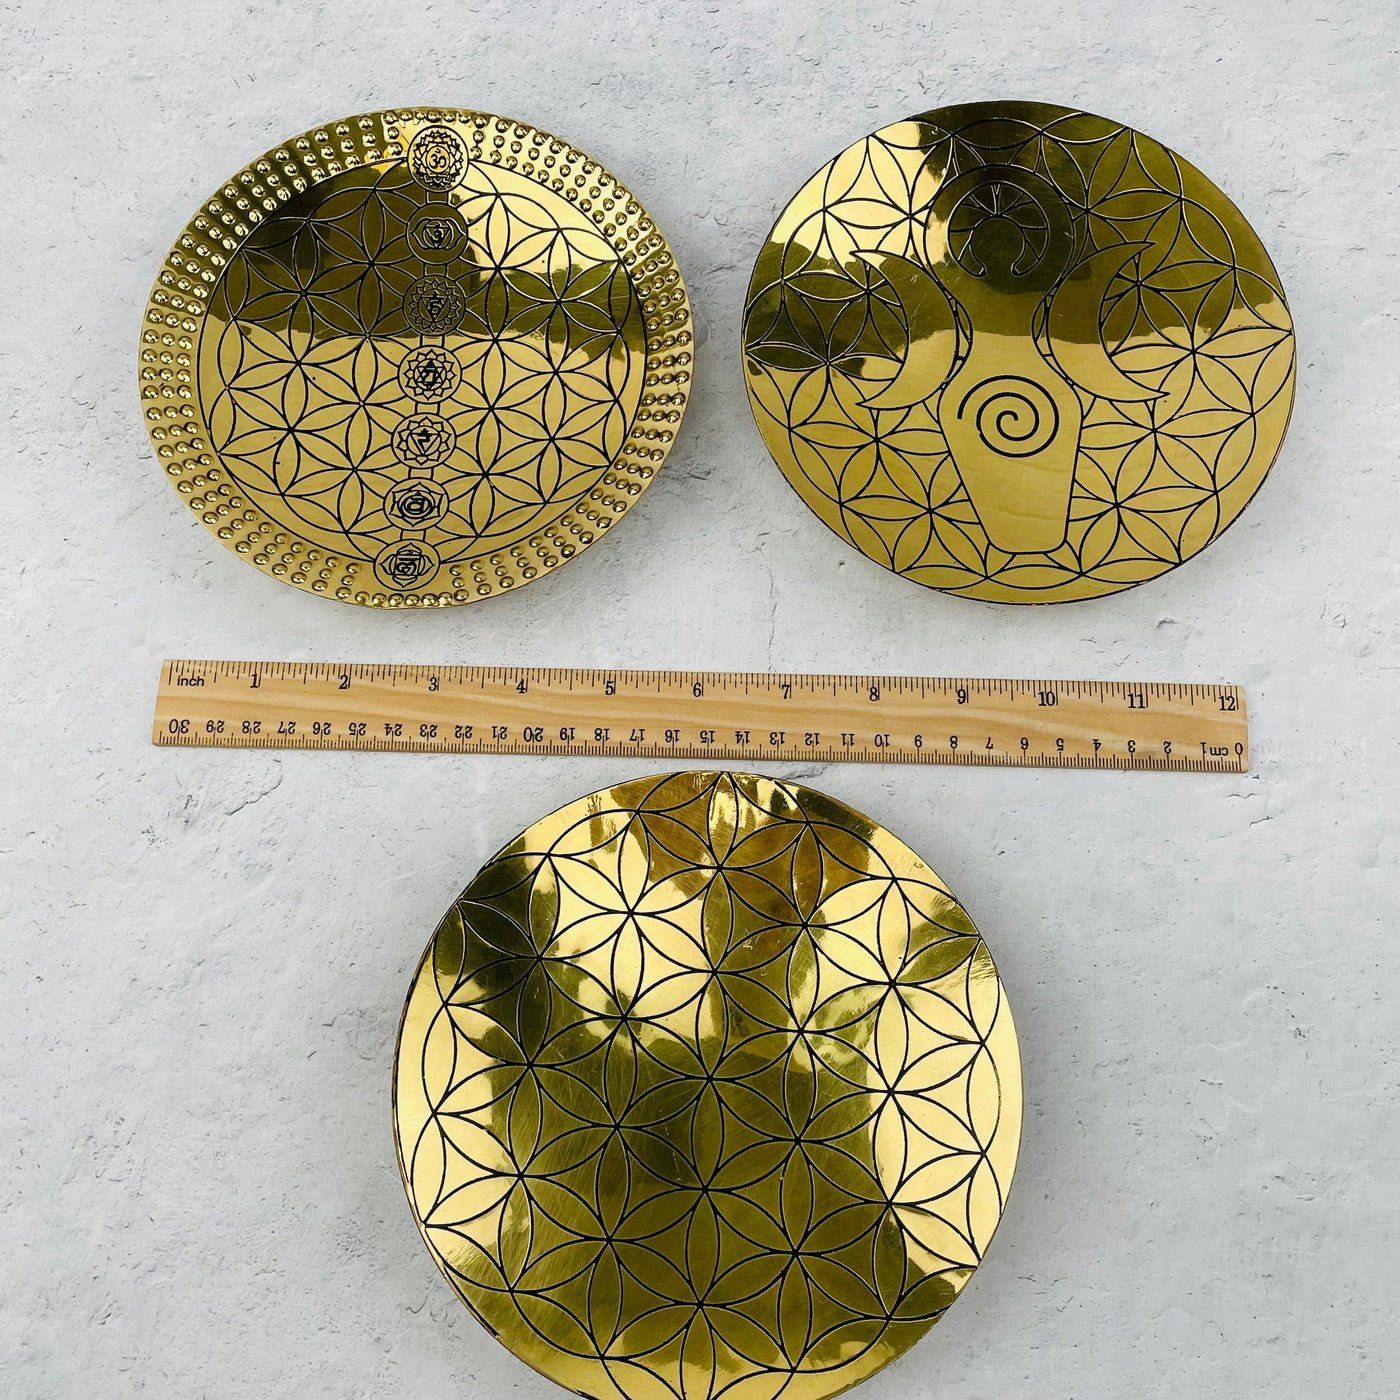 brass trays next to a ruler for size reference 